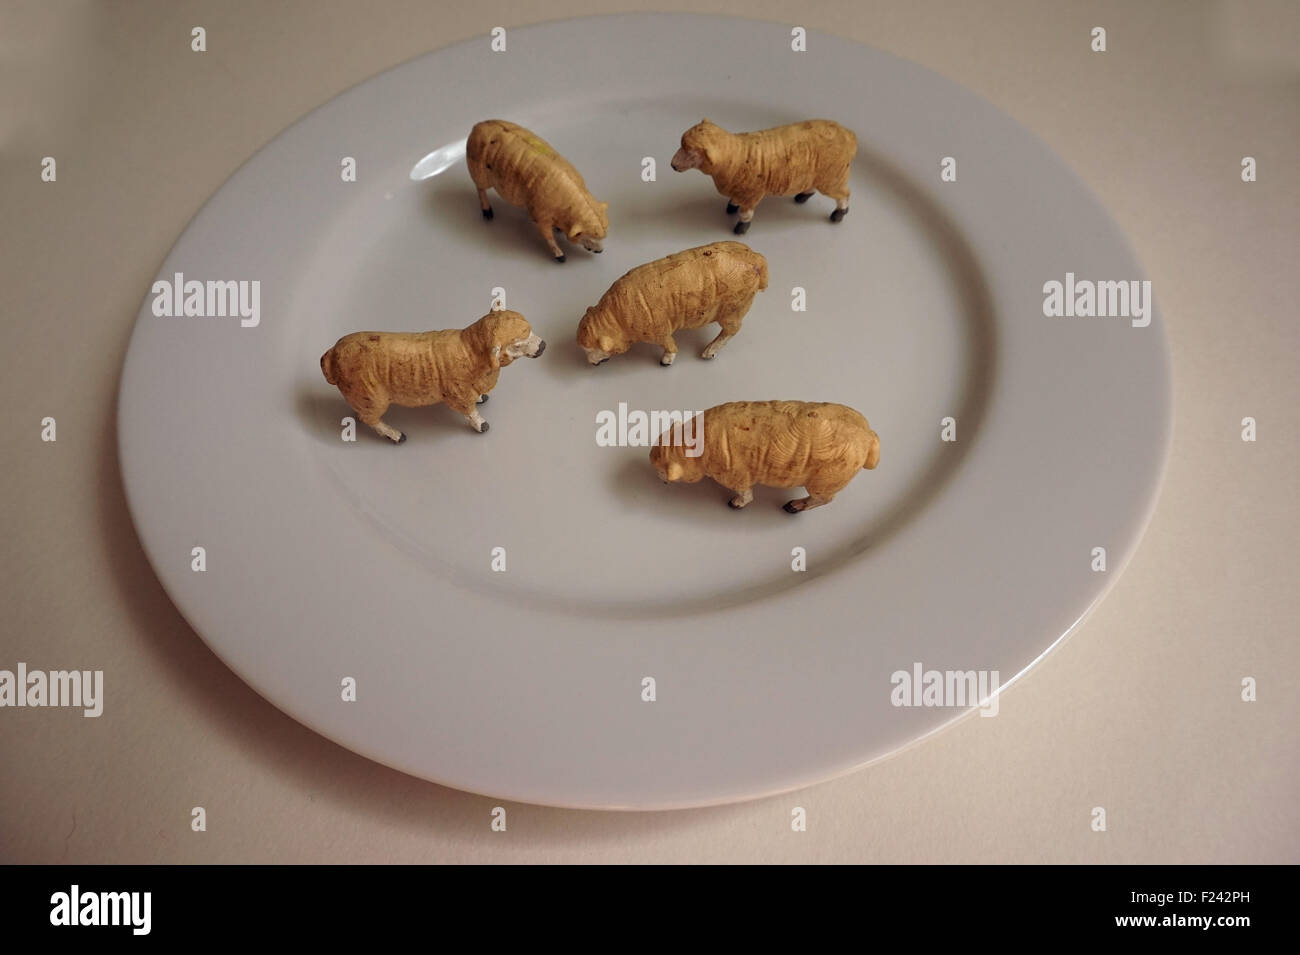 Toy farm animals - sheep on a plate Stock Photo